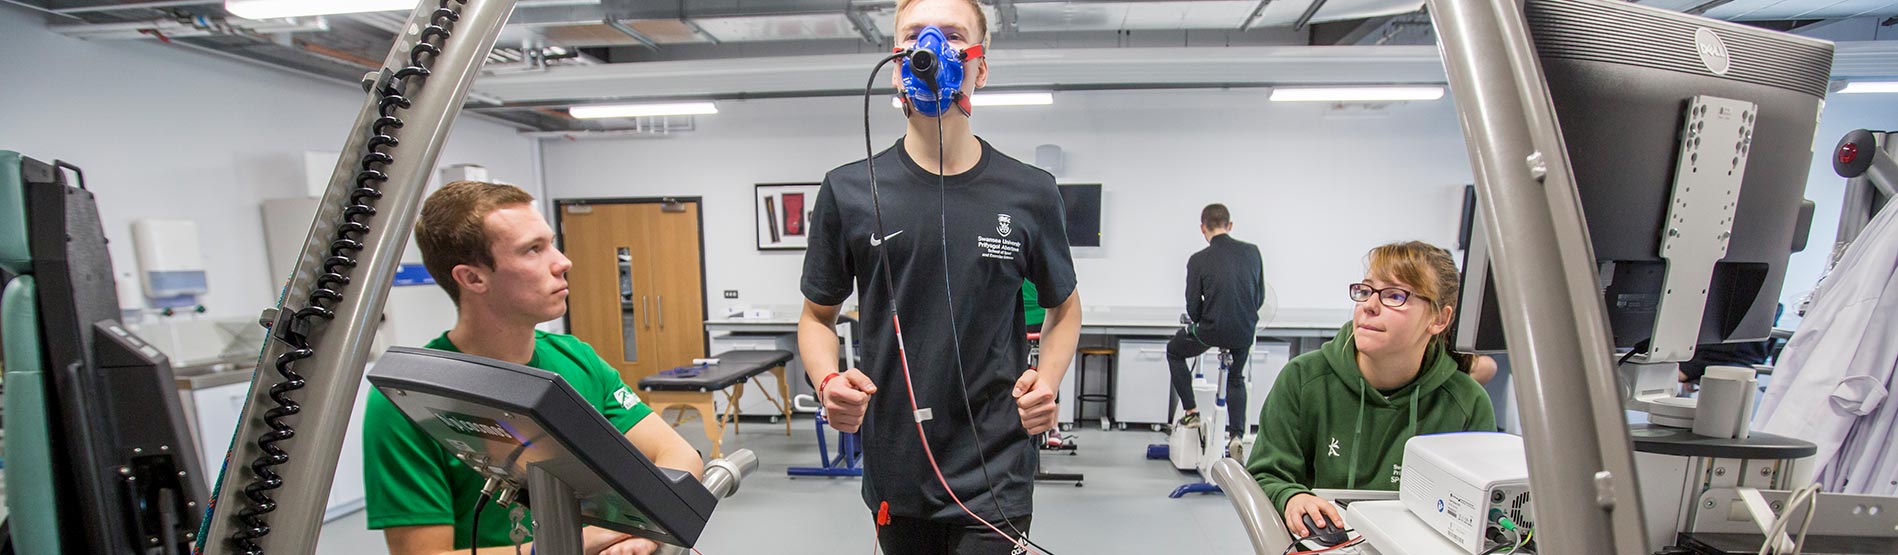 Student on treadmill with mask